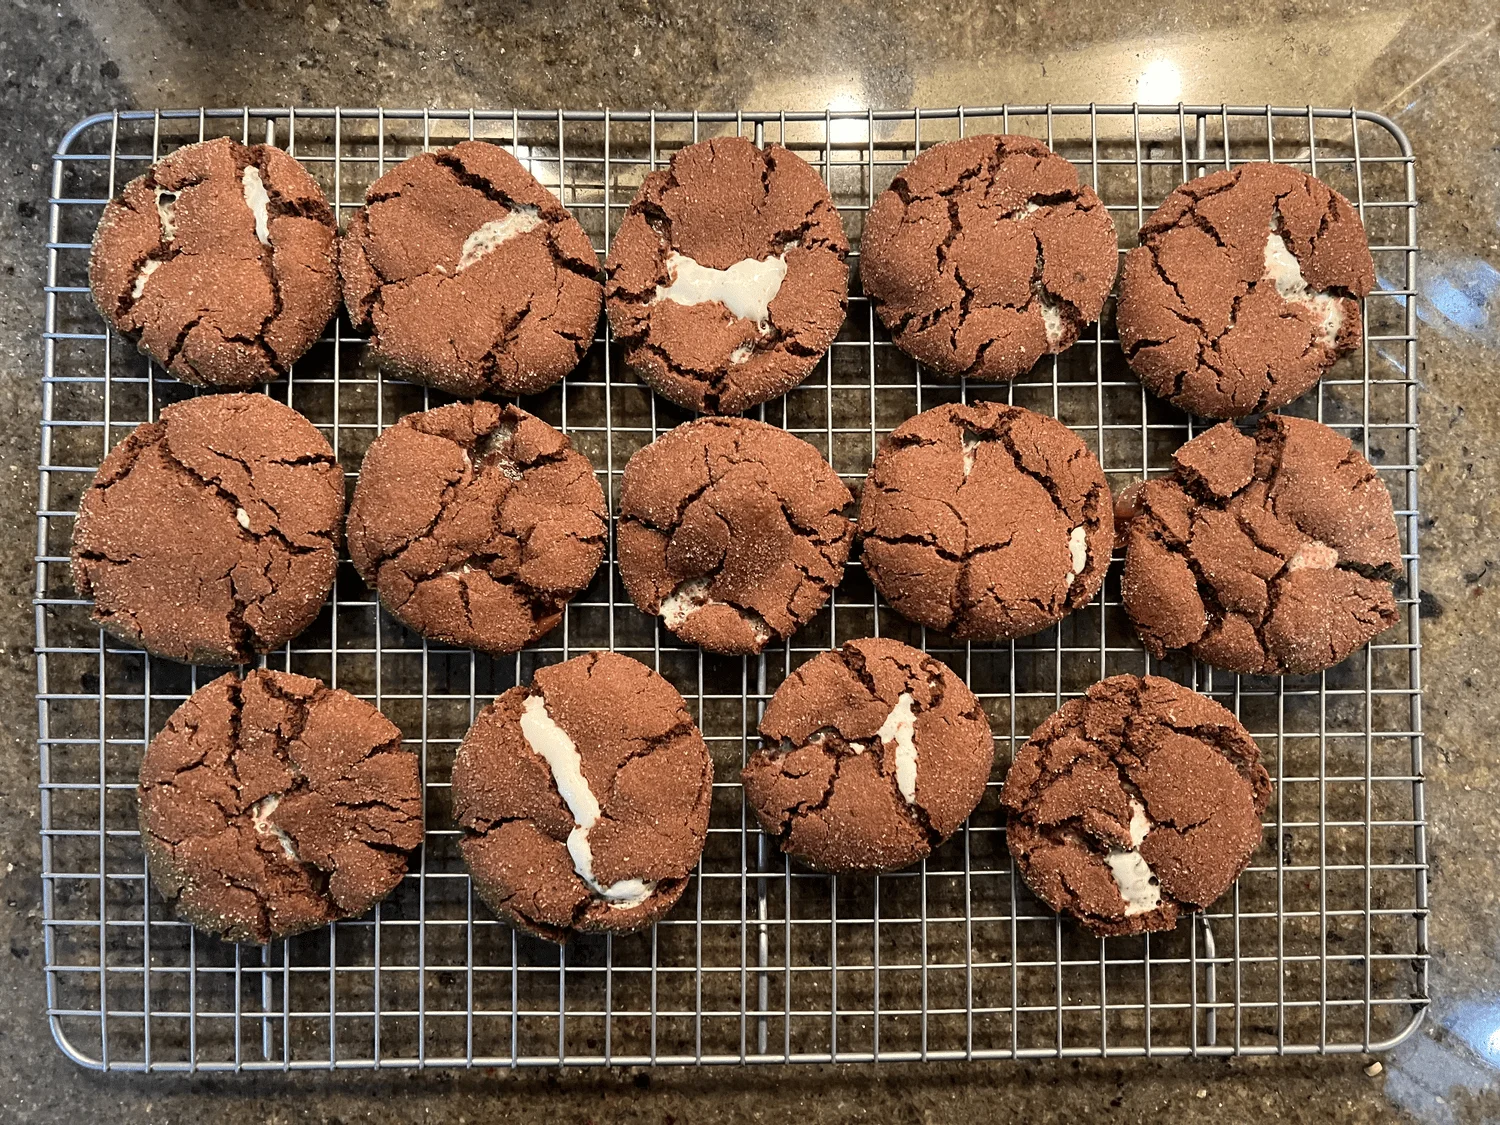 These cookies were spicy and chocolate, with a gooey marshmallow center and a crunchy cinnamon sugar coating.